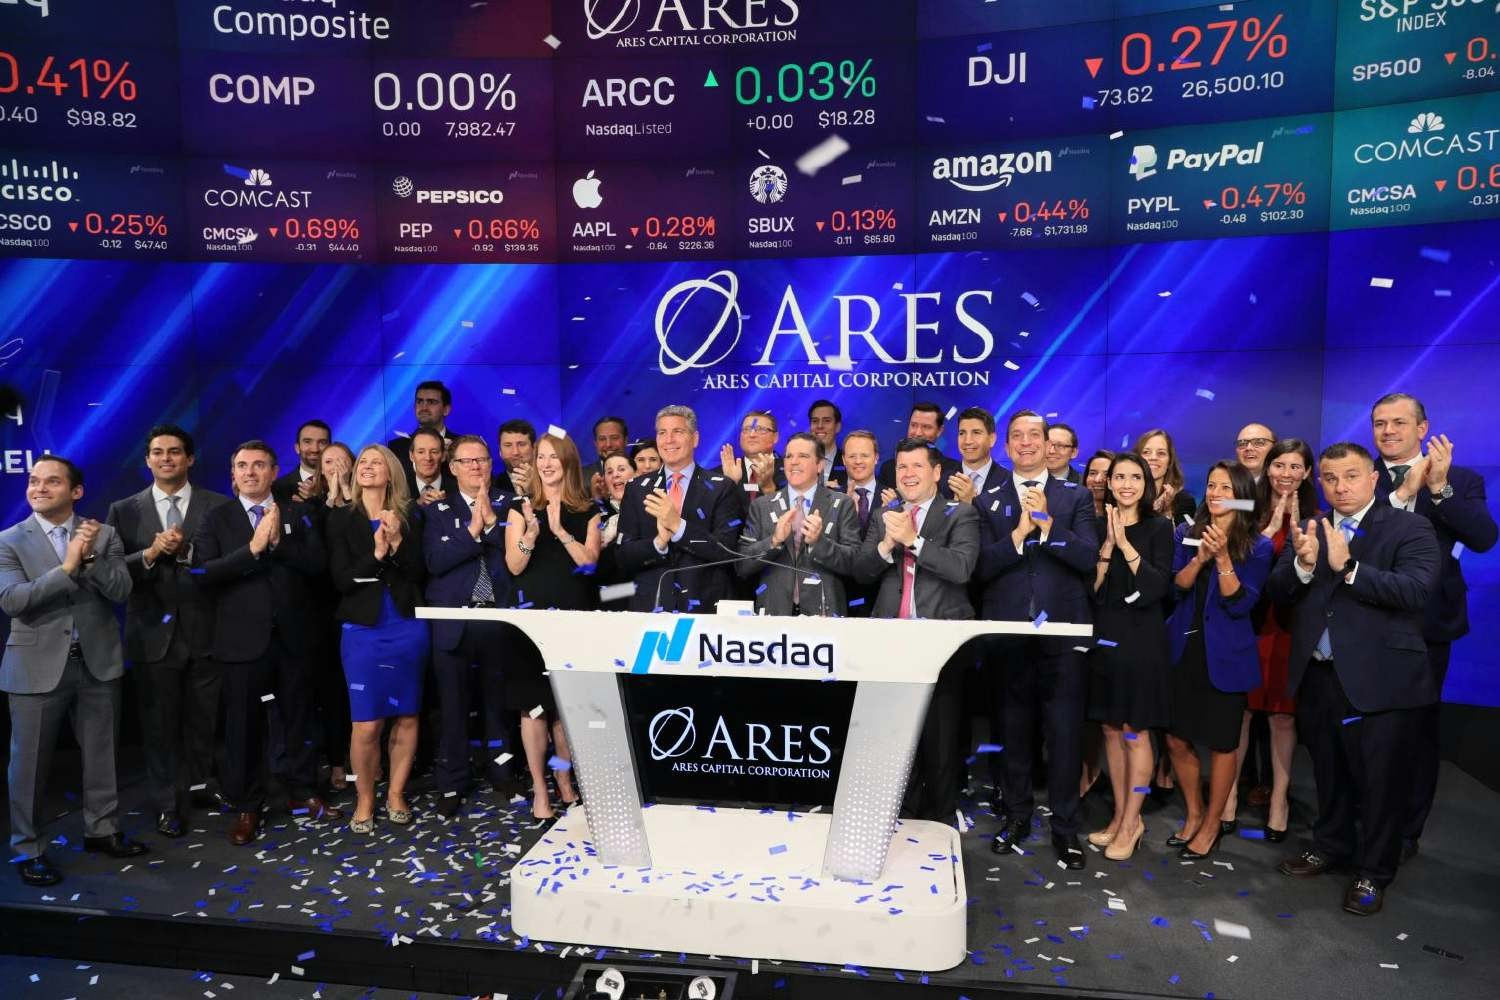 At Ares our greatest assets are our culture and our team. We thrive on collaboration & teamwork as 